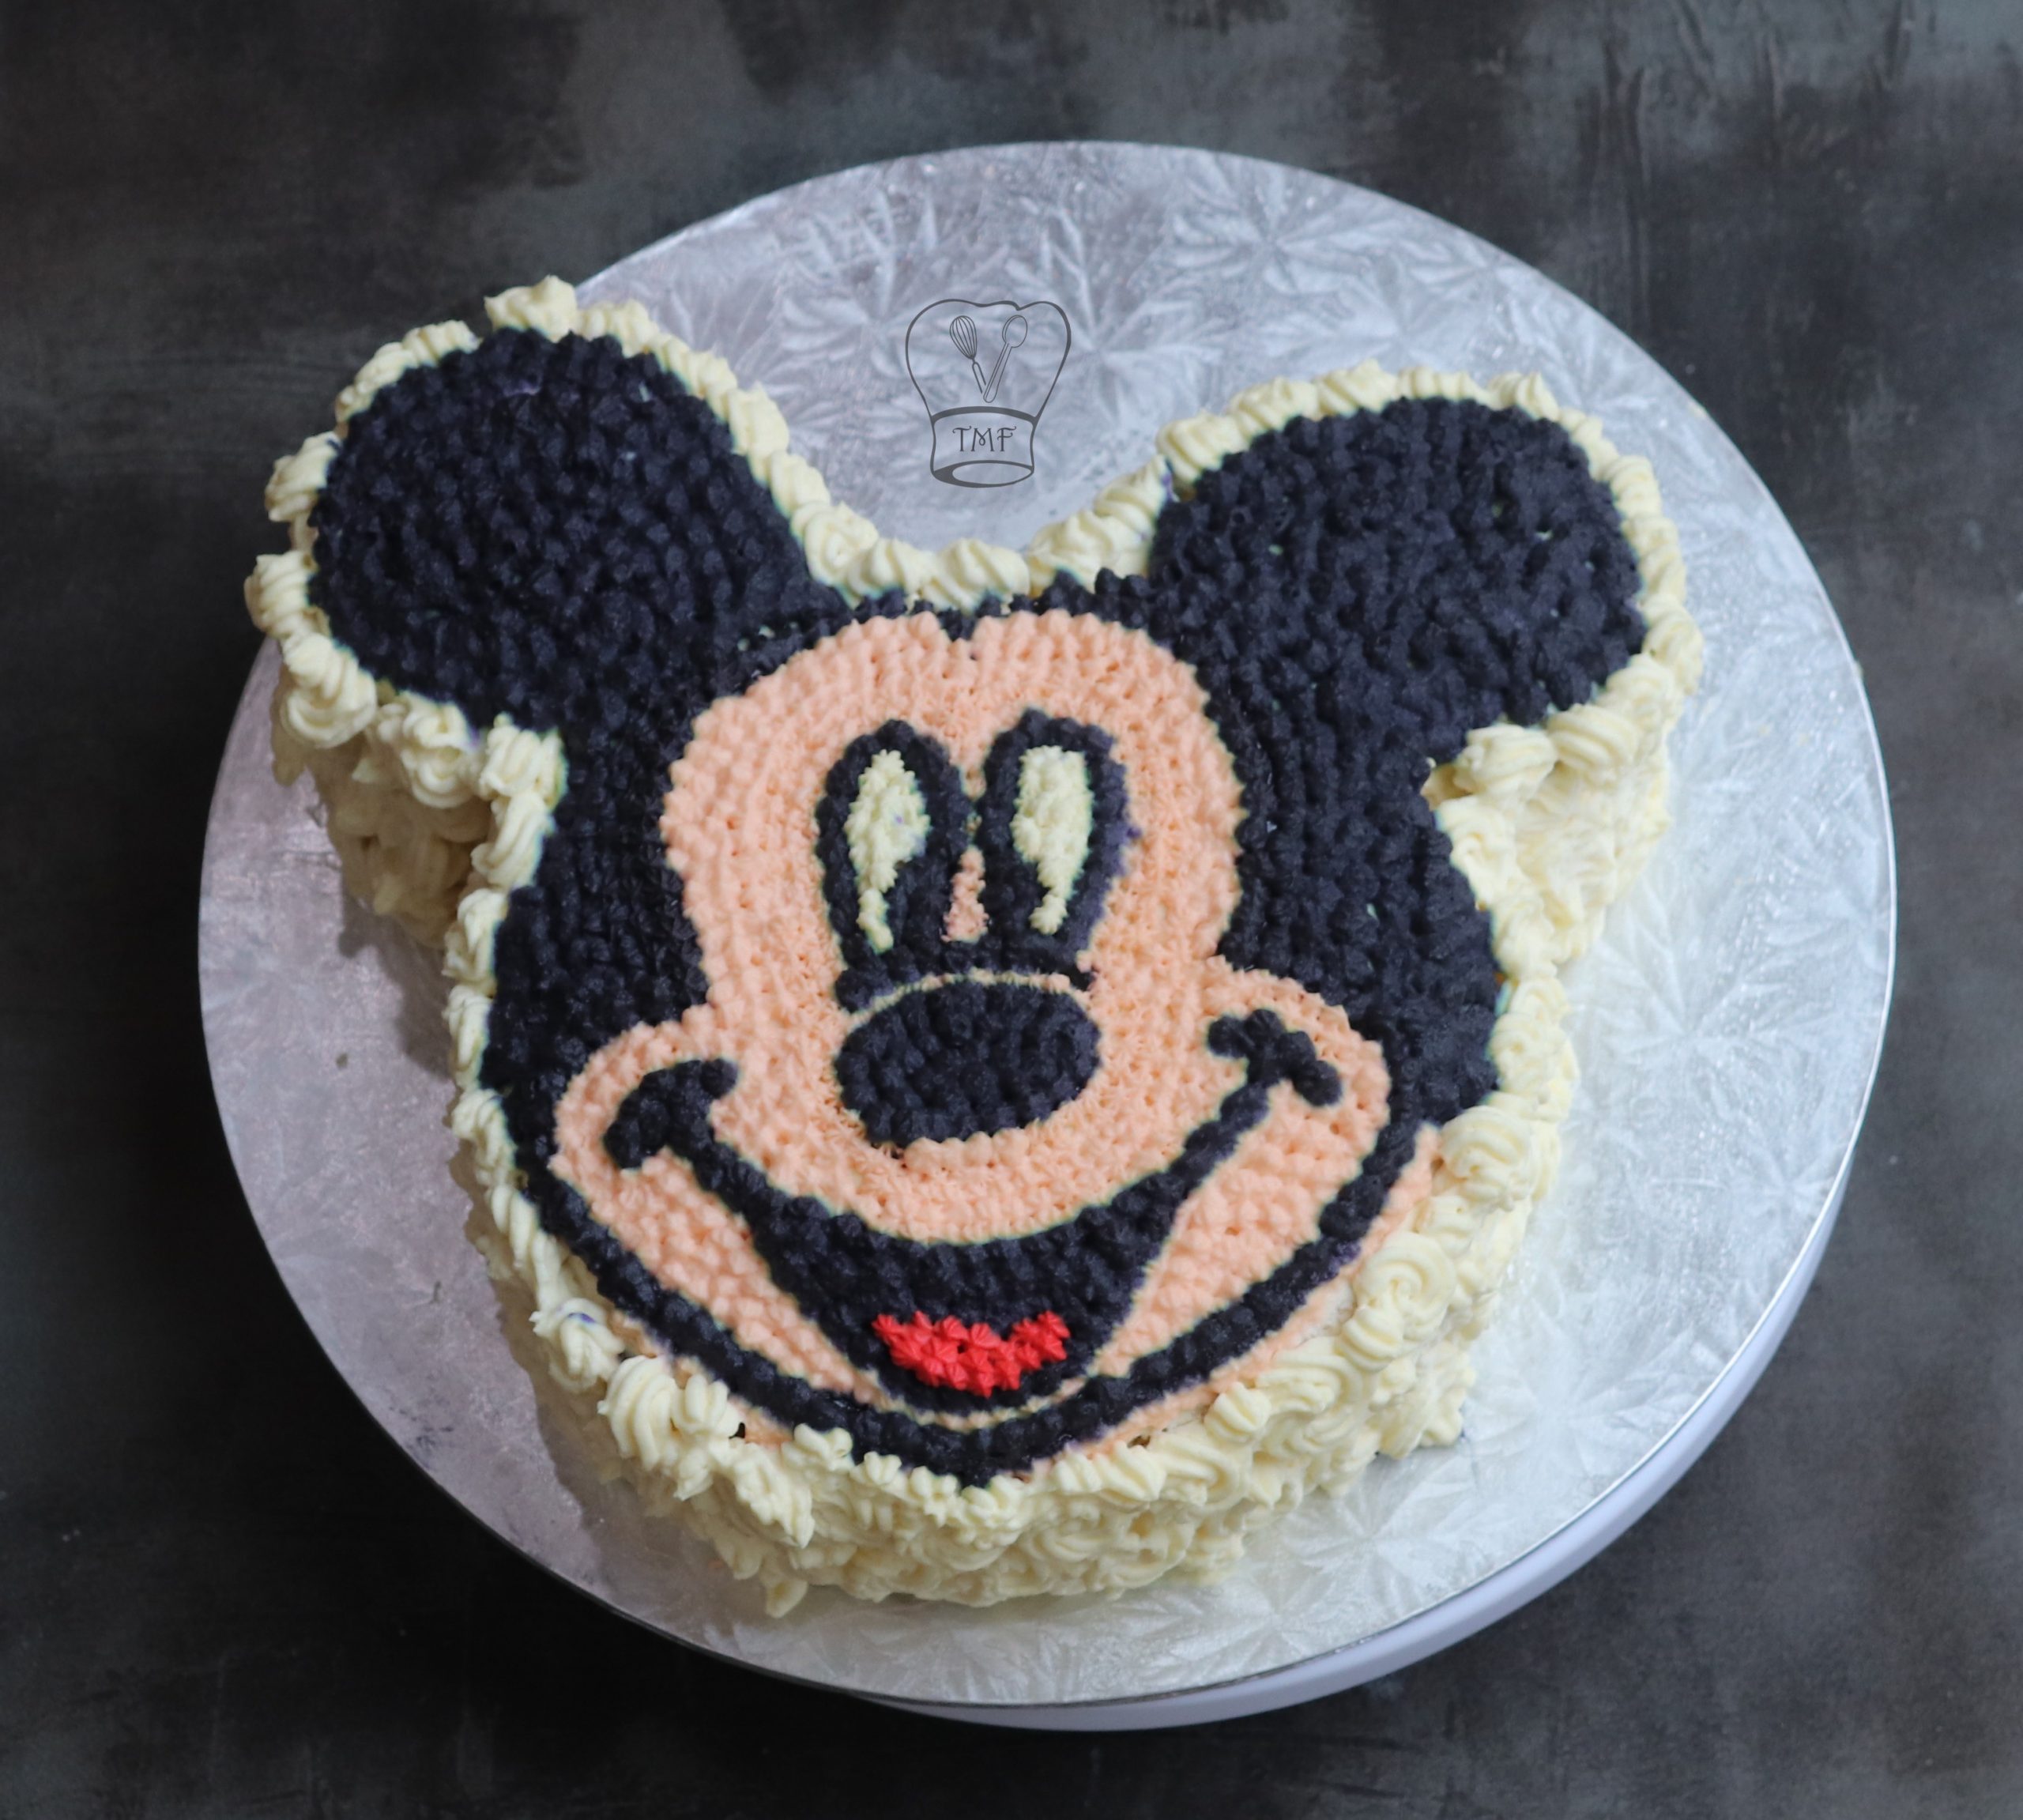 Sam's Club Is Selling Several Mickey Mouse-Themed Cakes and Cupcakes For Mickey  Mouse's 90th Birthday